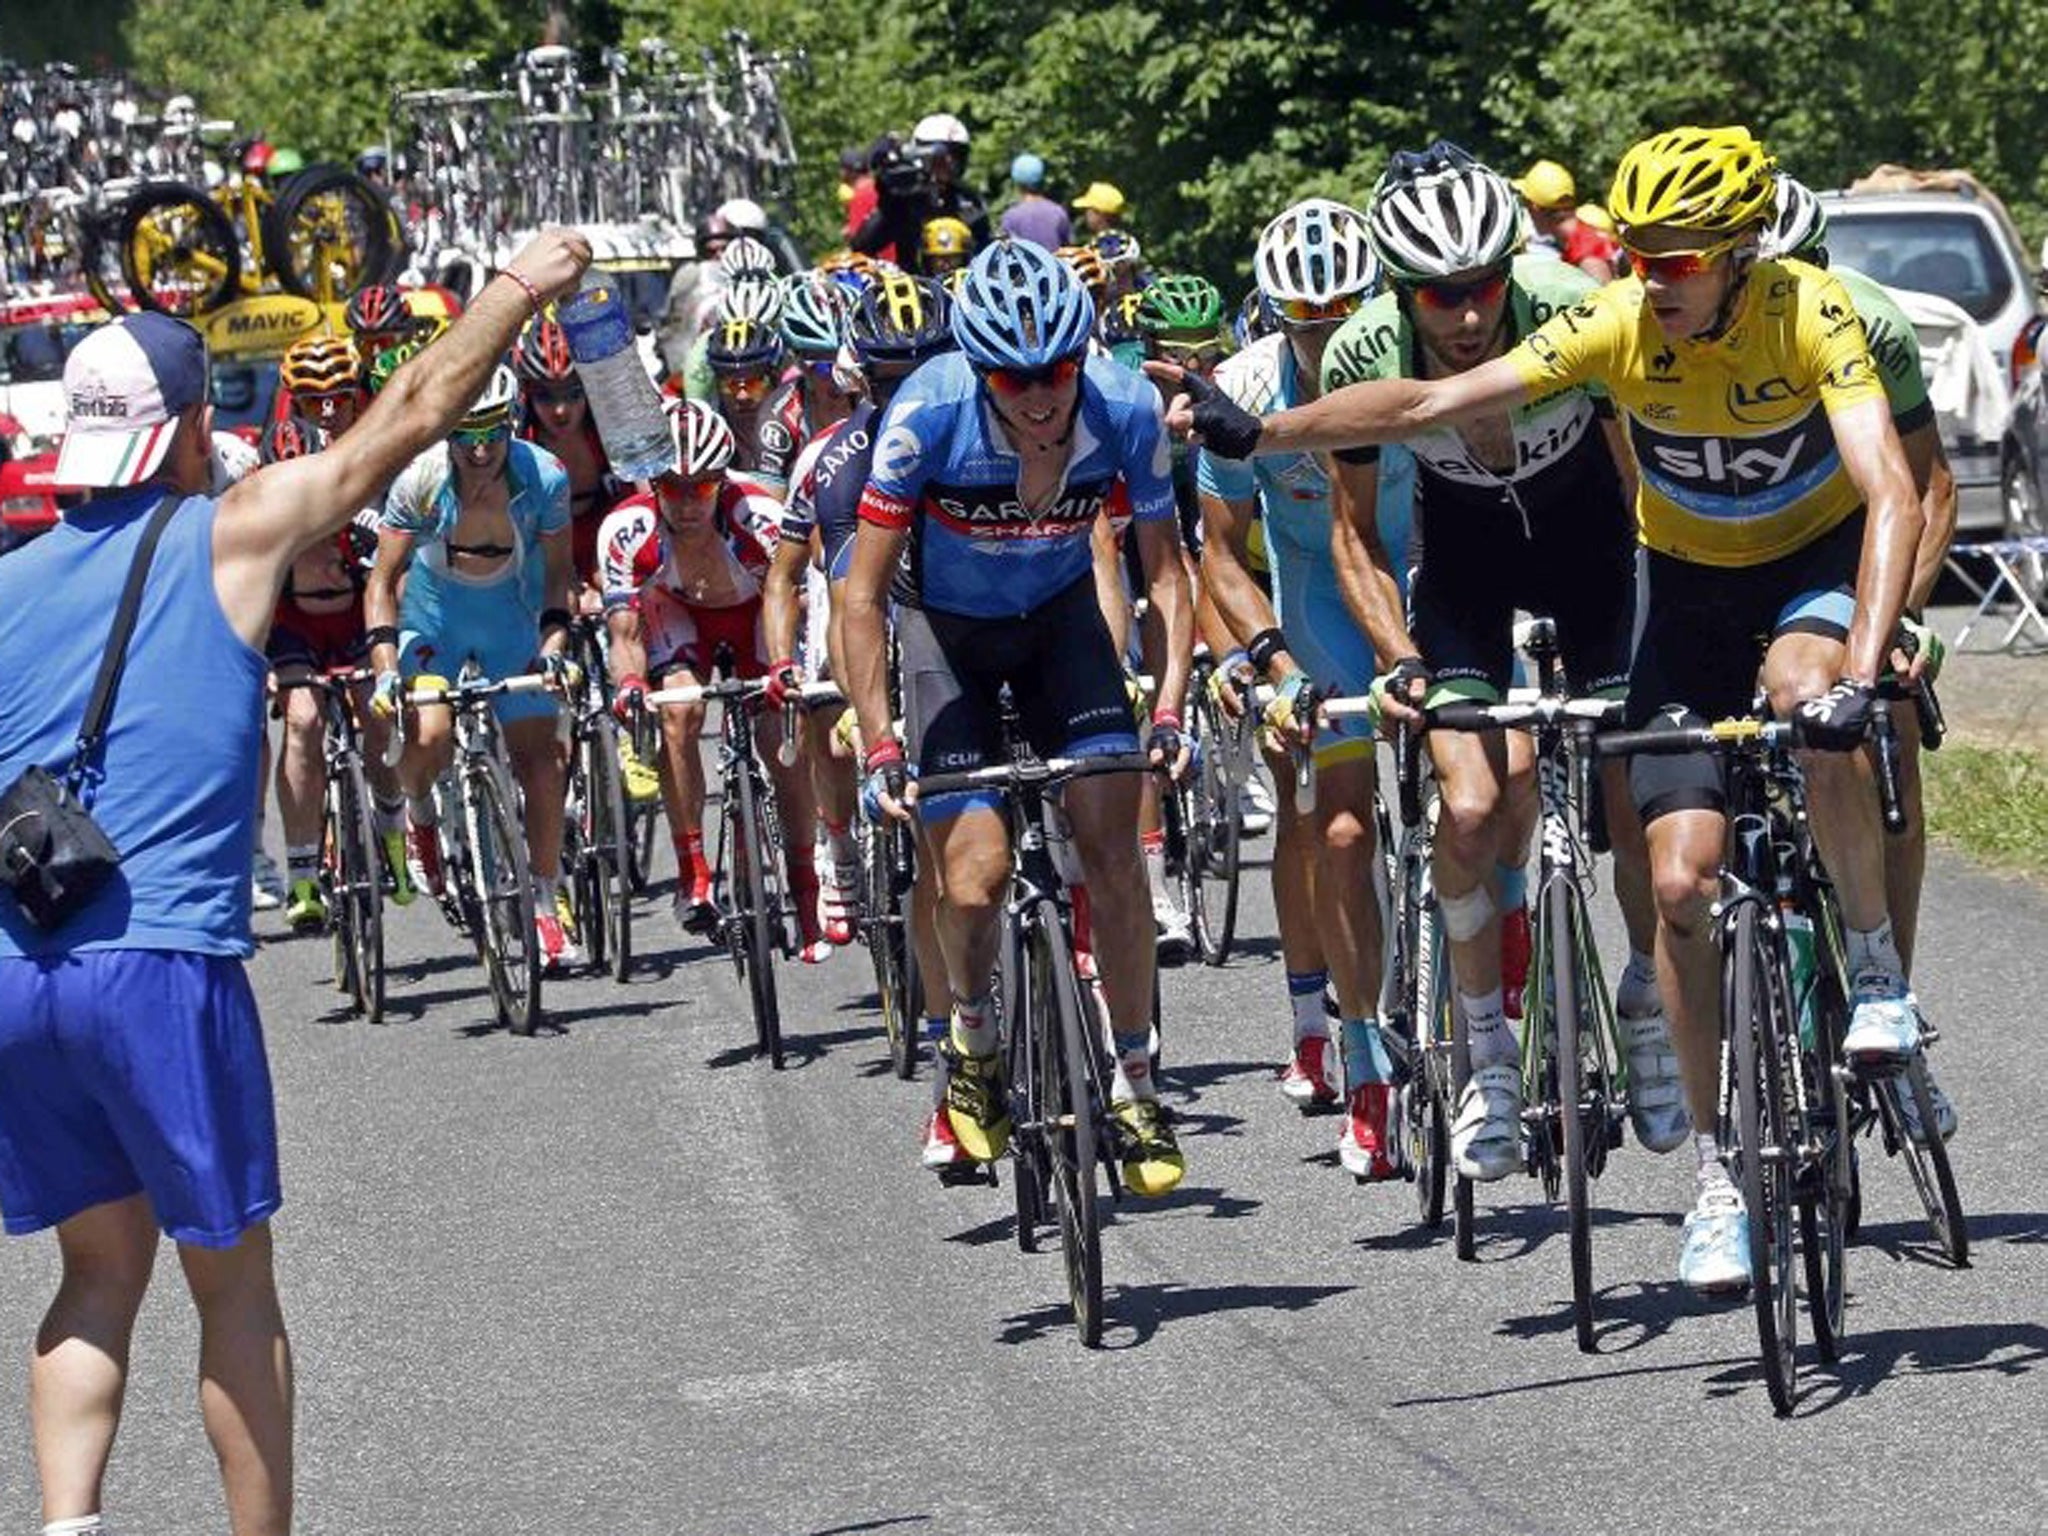 Yellow jersey holder Team Sky rider Christopher Froome of Britain cycles heads the pack during the 168.5 km ninth stage of the Tour de France from Saint-Girons to Bagneres-de-Bigorre